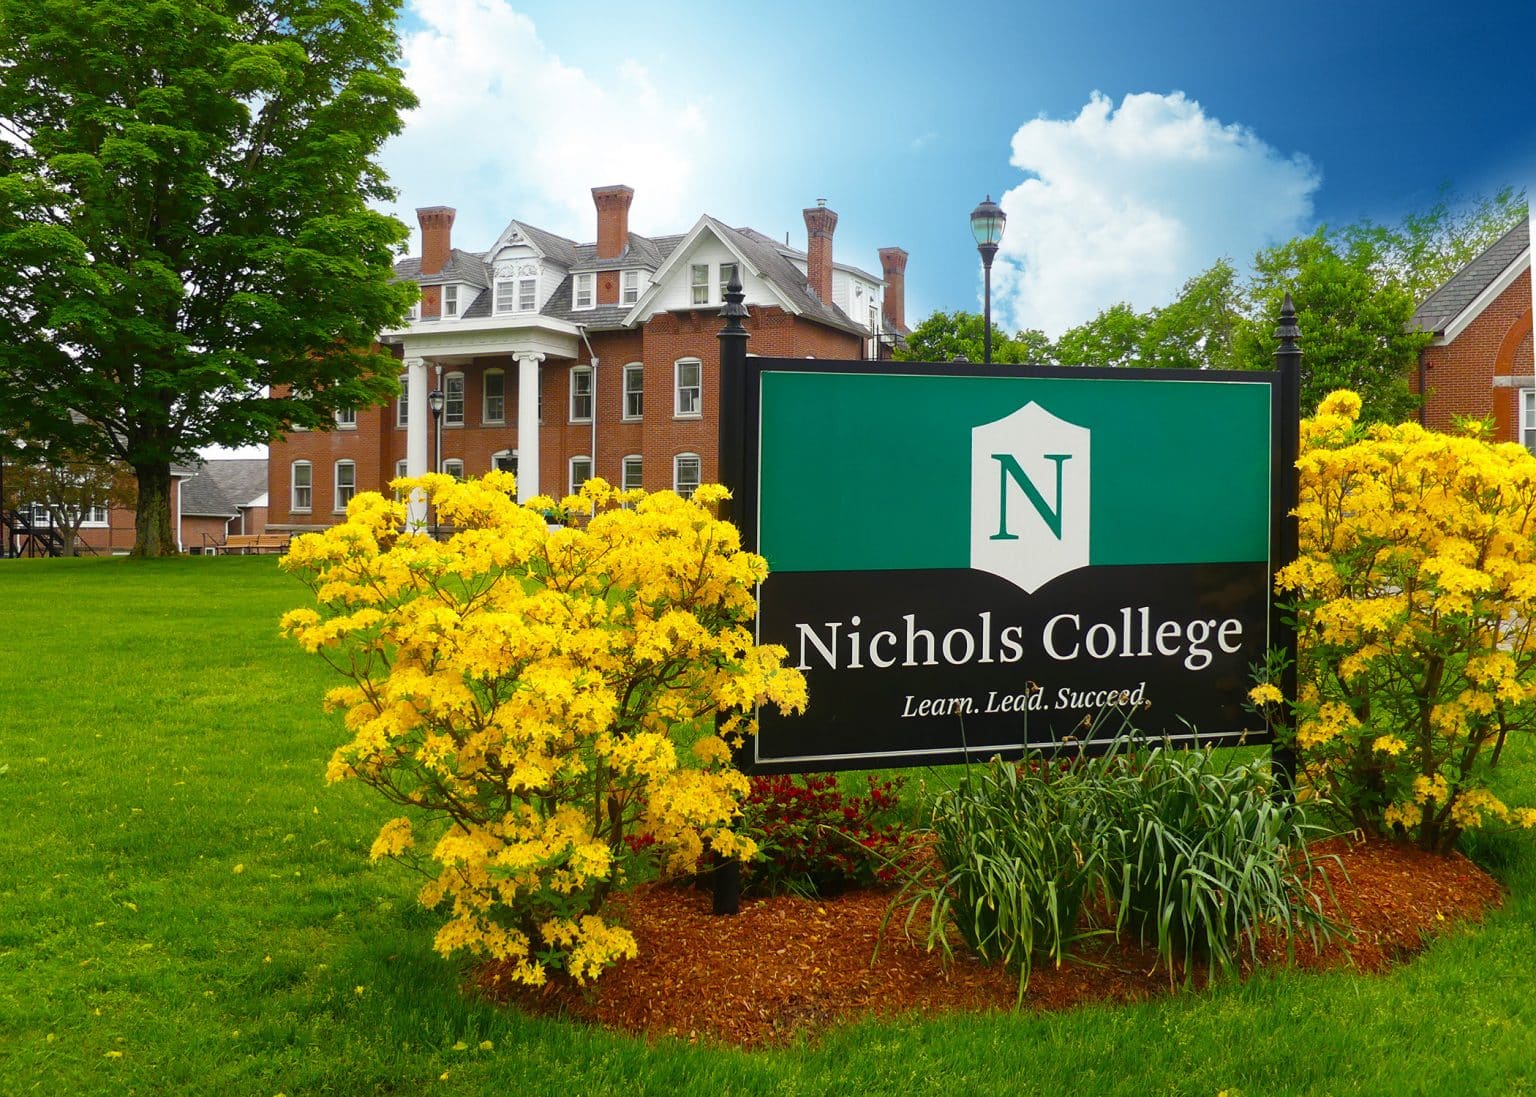 US News World Report Best Colleges rankings recognizes Nichols College